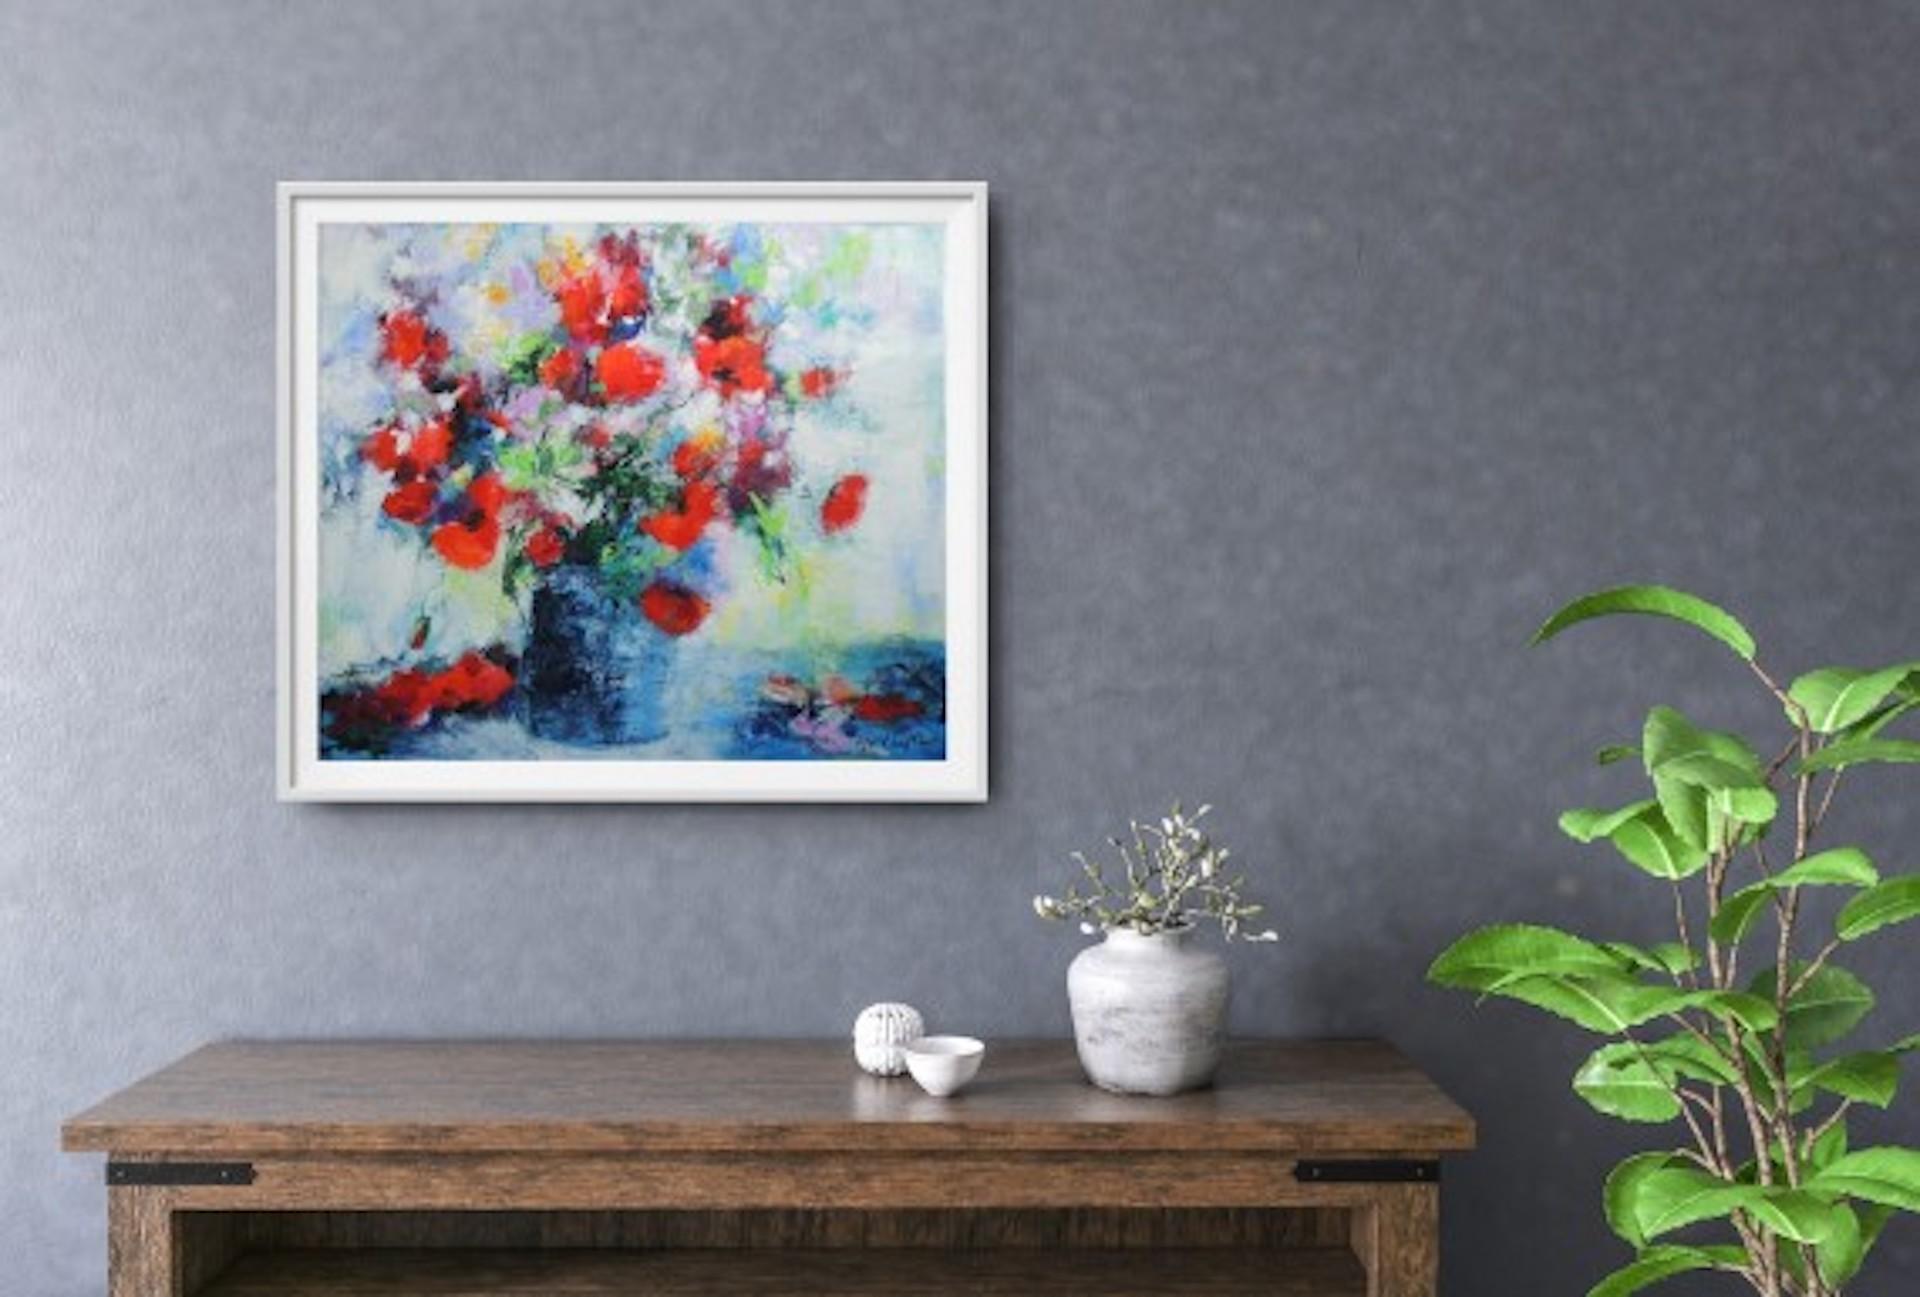 From the Normandy meadow (Impressionistic bouquet) by Mary Chaplin [2021]

original
acrylic
Image size: H:60 cm x W:70 cm
Complete Size of Unframed Work: H:60 cm x W:70 cm x D:2cm
Sold Unframed
Please note that insitu images are purely an indication